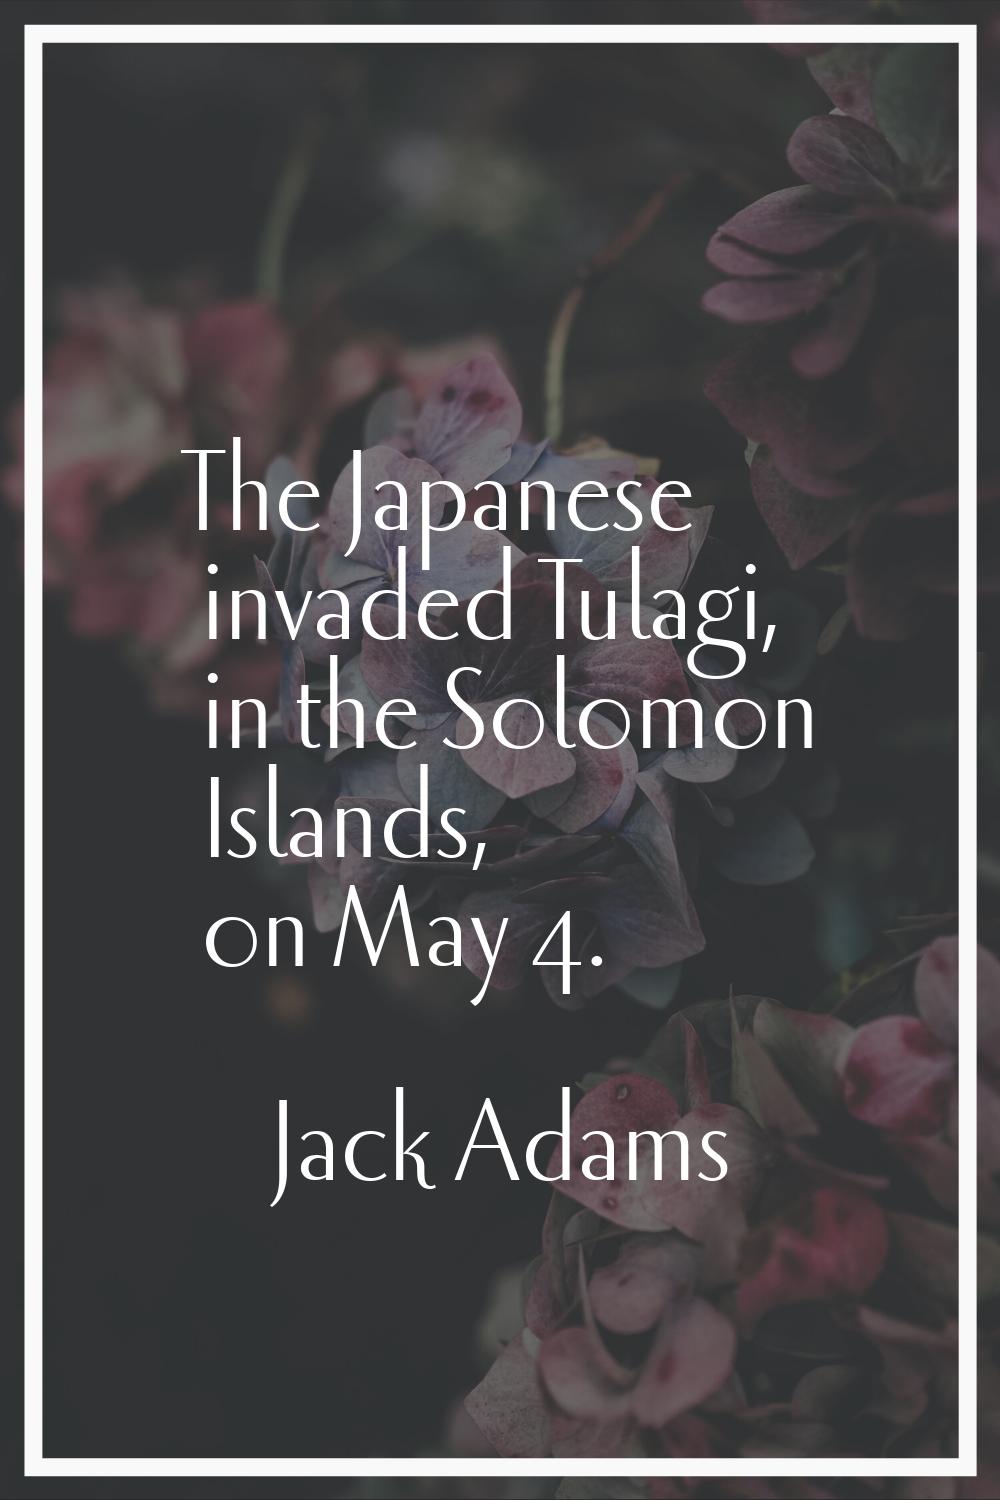 The Japanese invaded Tulagi, in the Solomon Islands, on May 4.